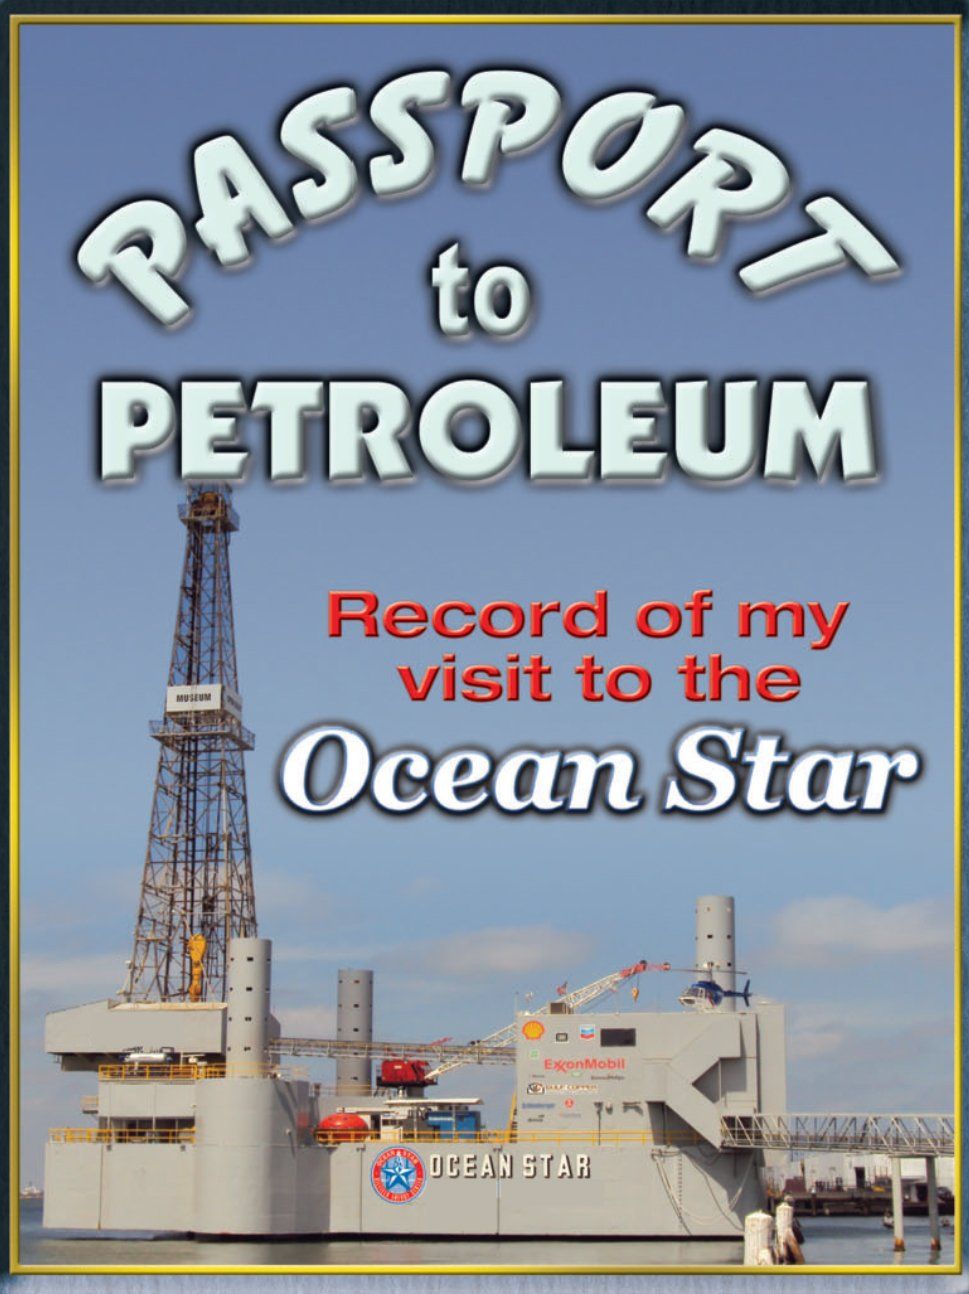 passport to petroleum record of my visit to the ocean star